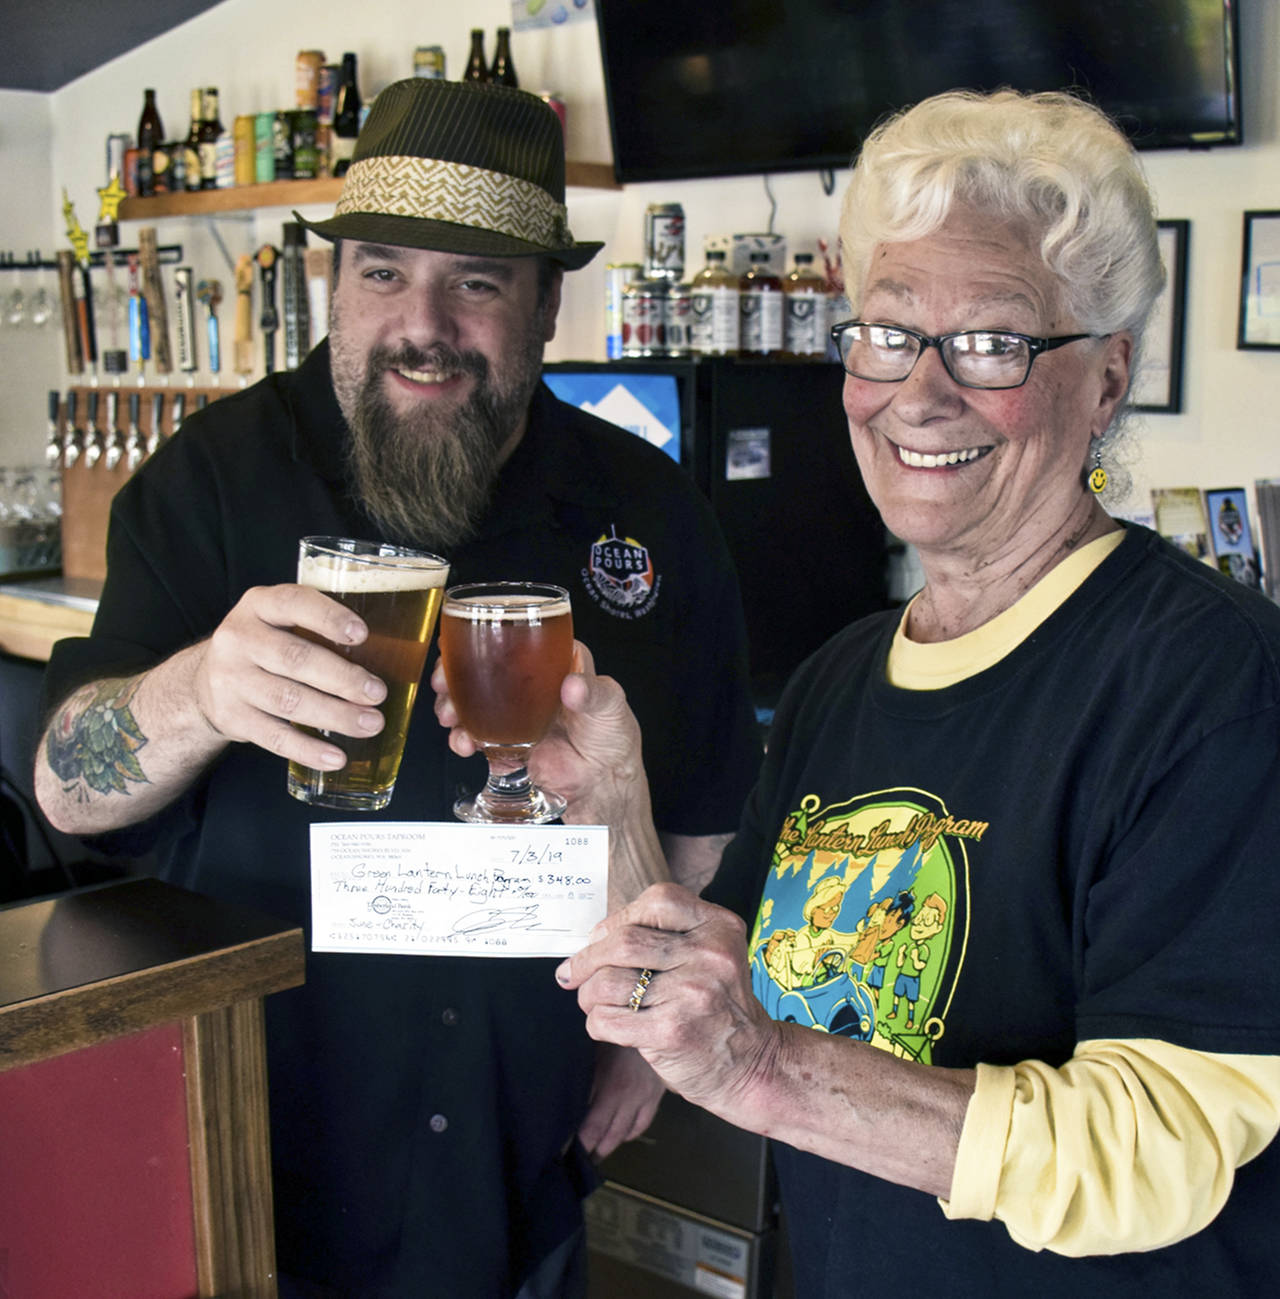 Scott D. Johnston | For Grays Harbor News Group                                Ocean Pours Taproom general manager Chris Shifman, left, and Green Lantern Lunch Program founder Phyllis Shaughnessy toast the pub’s donation to the North Coast nonprofit organization, which feeds area kids during the summer. Shifman says each month, his Ocean Shores pub designates one of more of its 16 taps to give a 50-cent donation for each glass poured to a different local nonprofit. June’s donation for Green Lantern amounted to nearly $350, which he says was the largest amount since the business opened last winter.